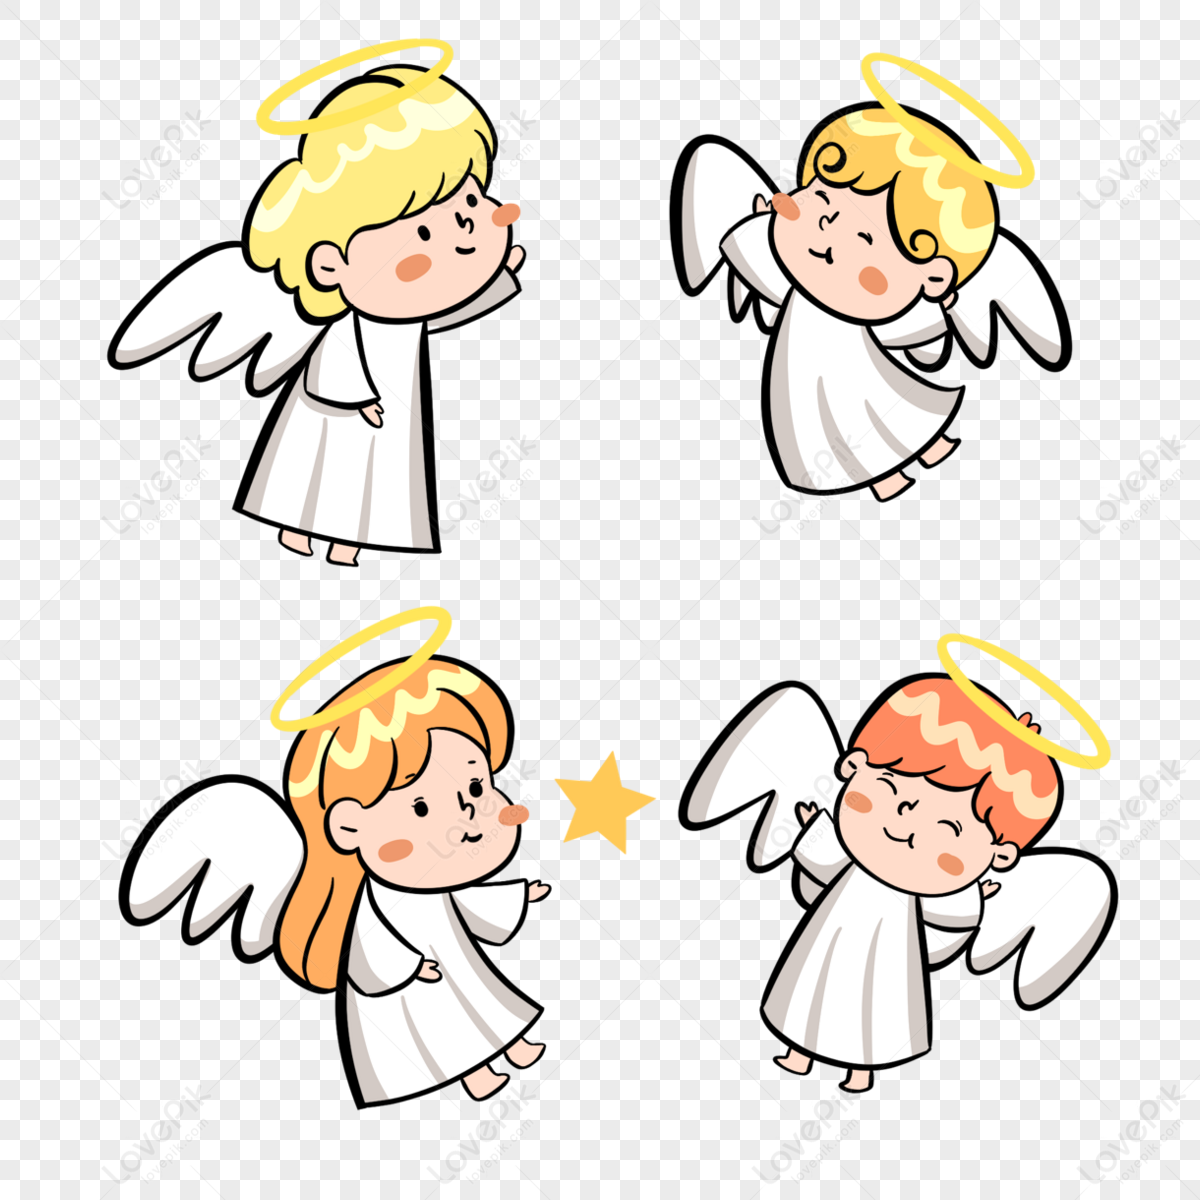 Cartoon Christmas Little Angel, Christmas PNG Transparent Images, Colored  PNG Image, Cute PNG Image PNG White Transparent And Clipart Image For Free  Download - Lovepik | 375667242